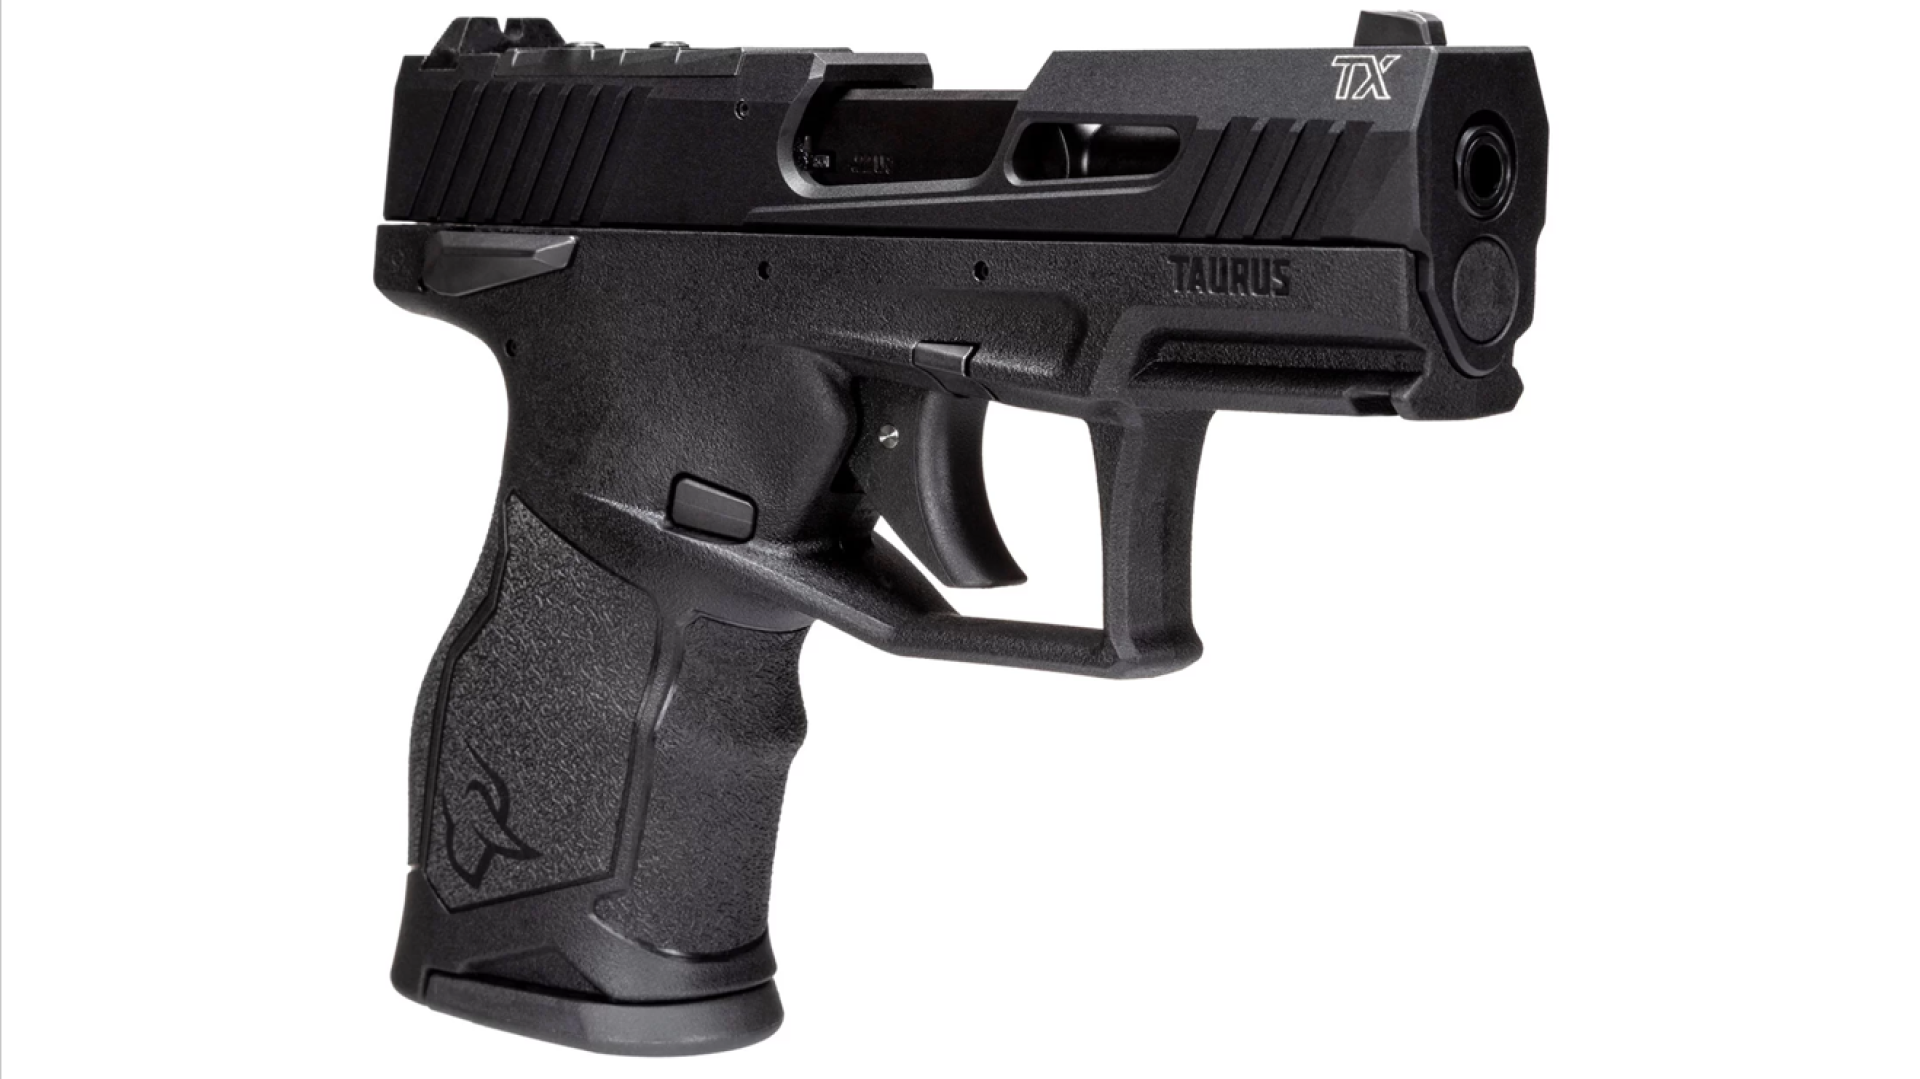 Reviewed: Taurus Tx 22 Compact Pistol | Nra Family